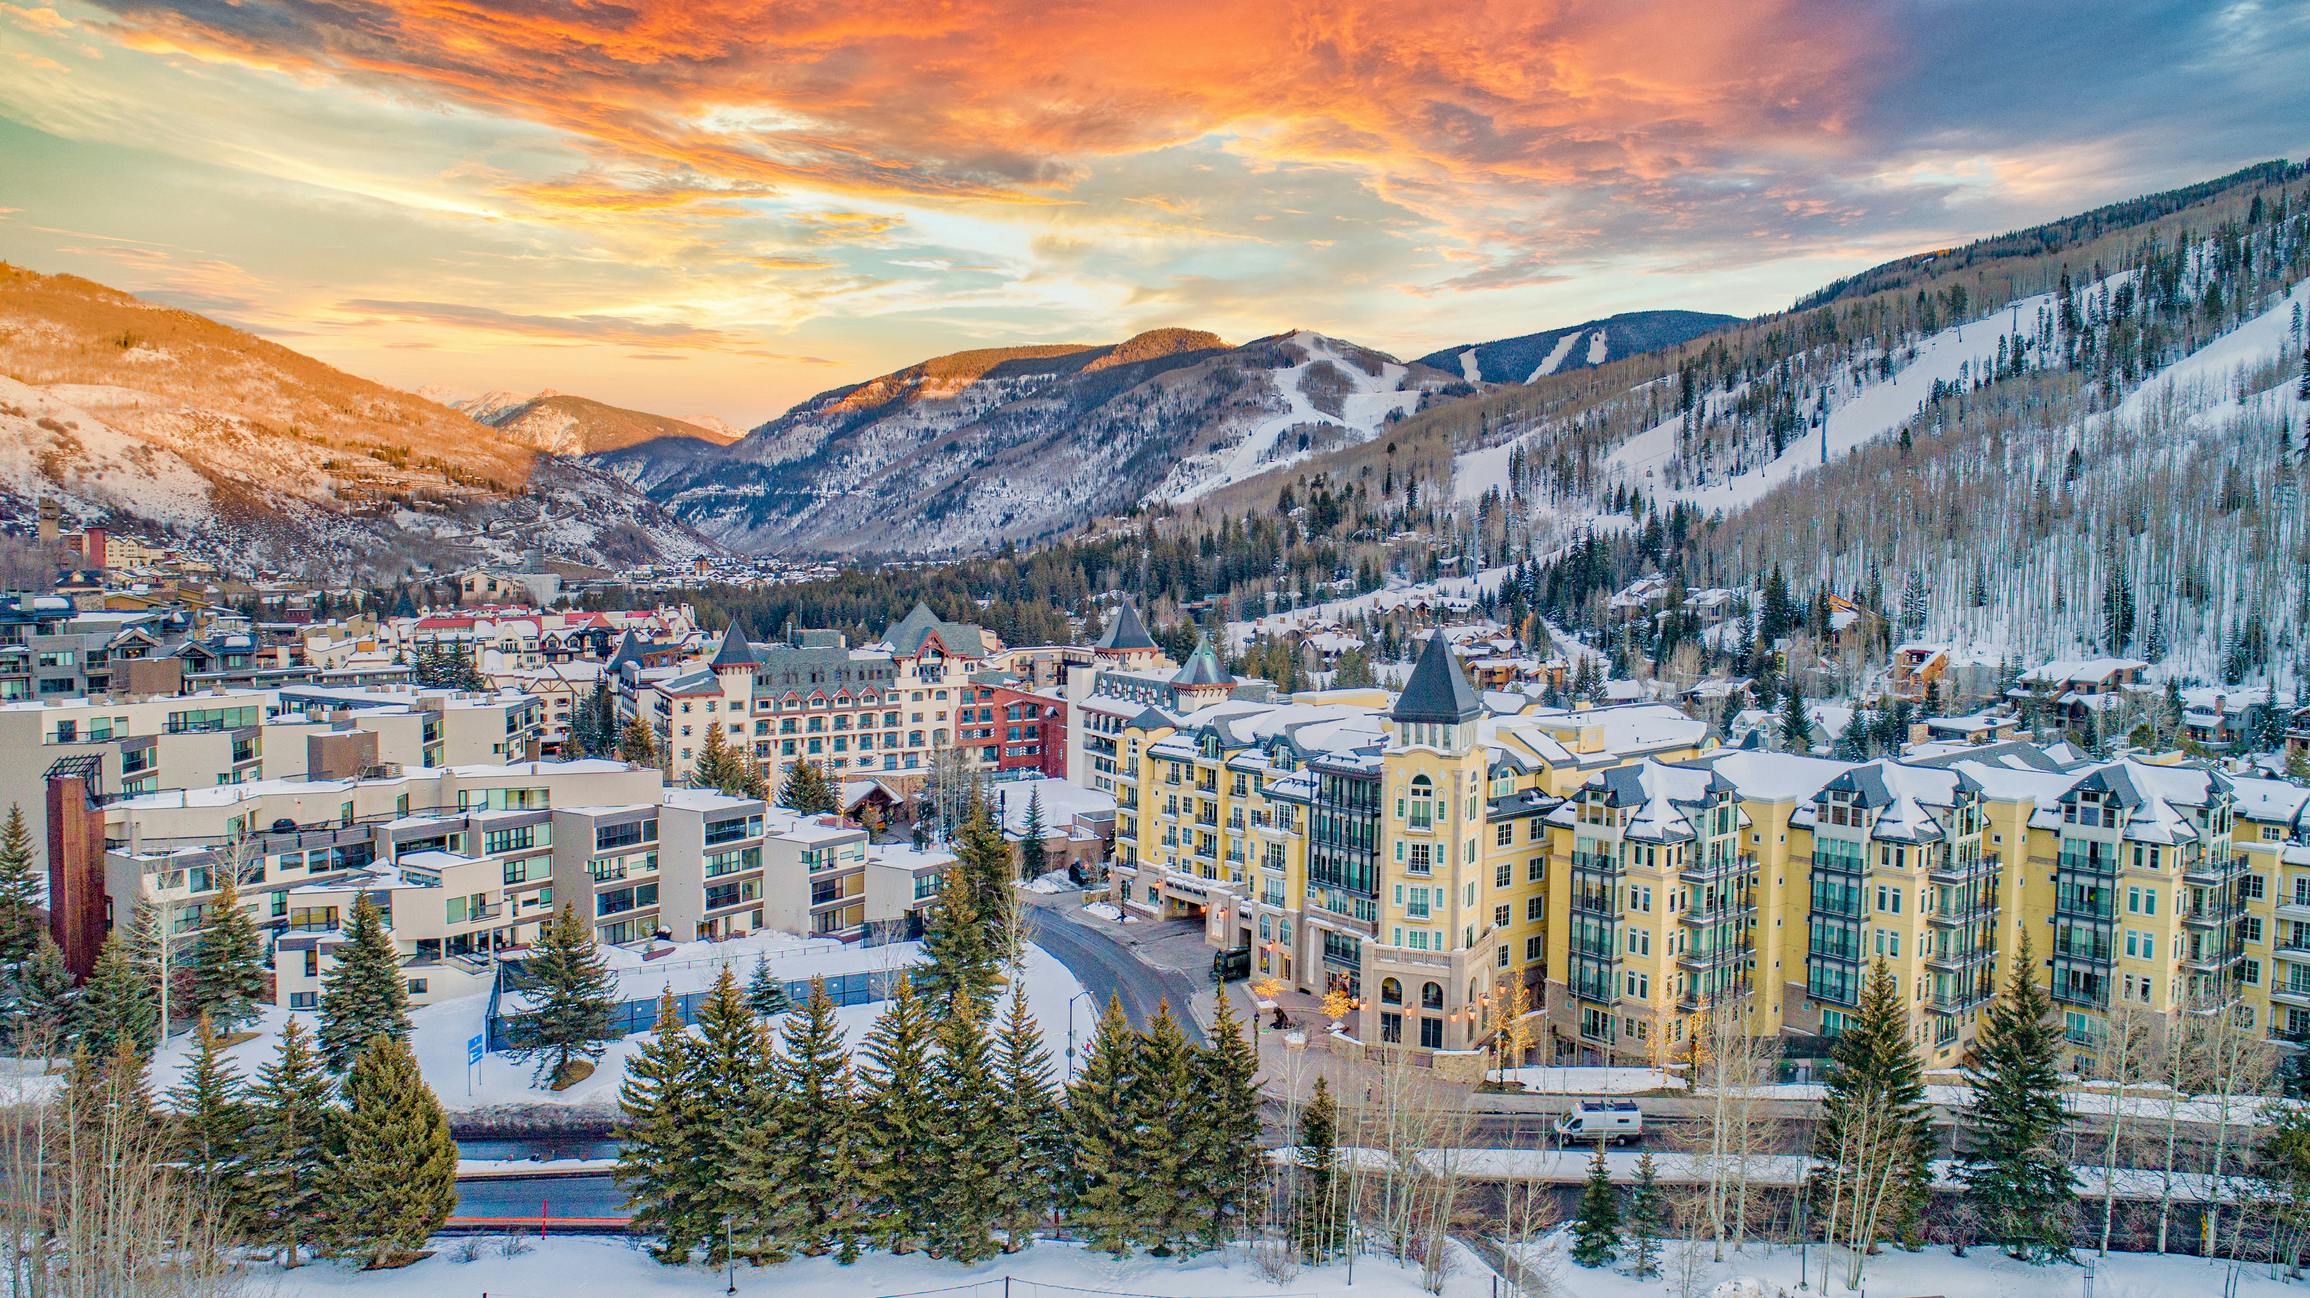 View of Vail with the mountains and sunset in the background